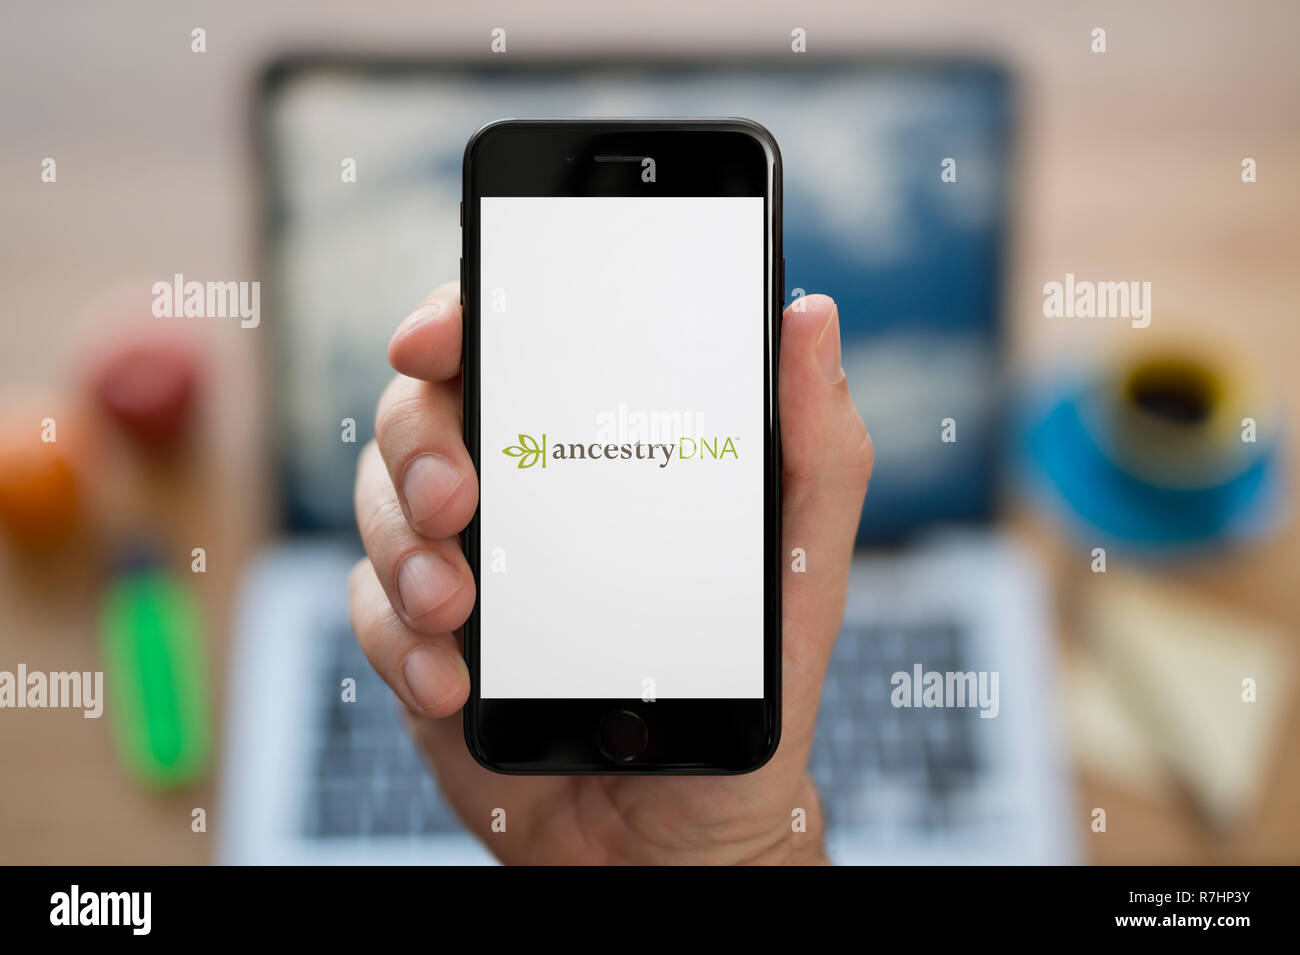 A man looks at his iPhone which displays the AncestryDNA logo (Editorial use only). Stock Photo